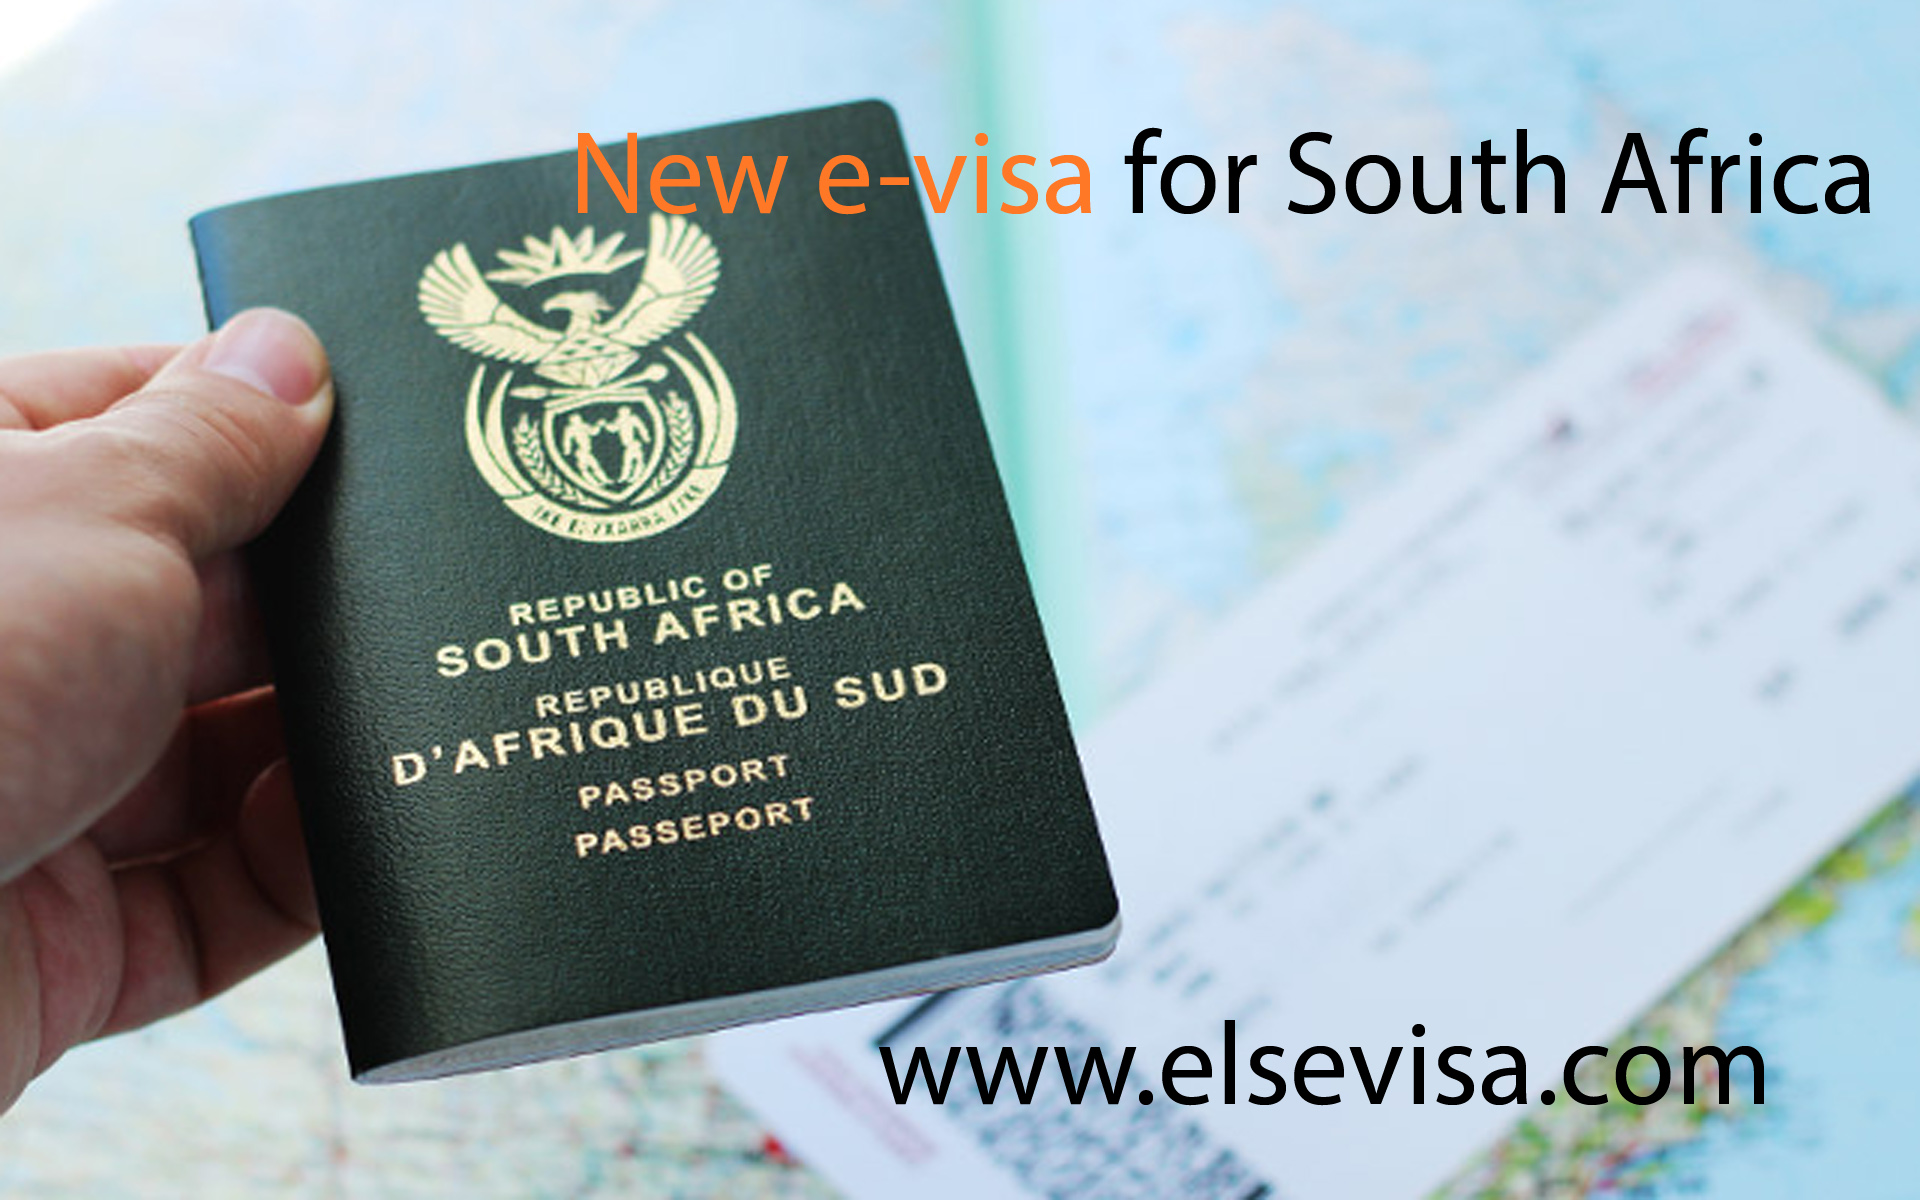 New e-visa for South Africa, ready to launch in October this year